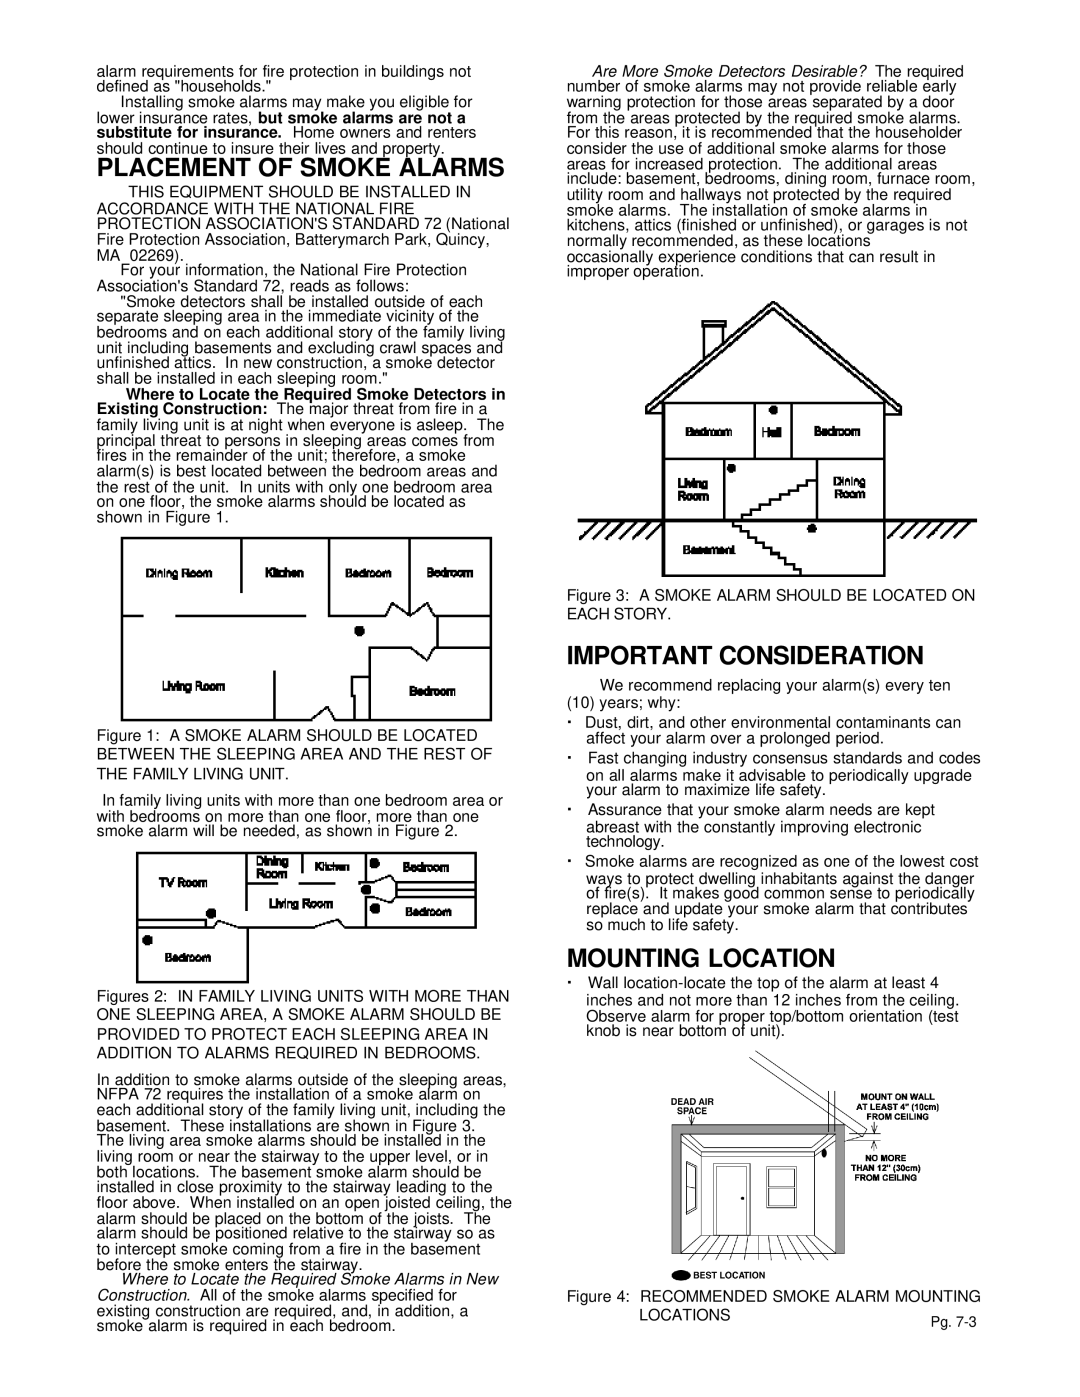 Gentek 713LS, 710LS installation instructions Placement Of Smoke Alarms, Important Consideration, Mounting Location 